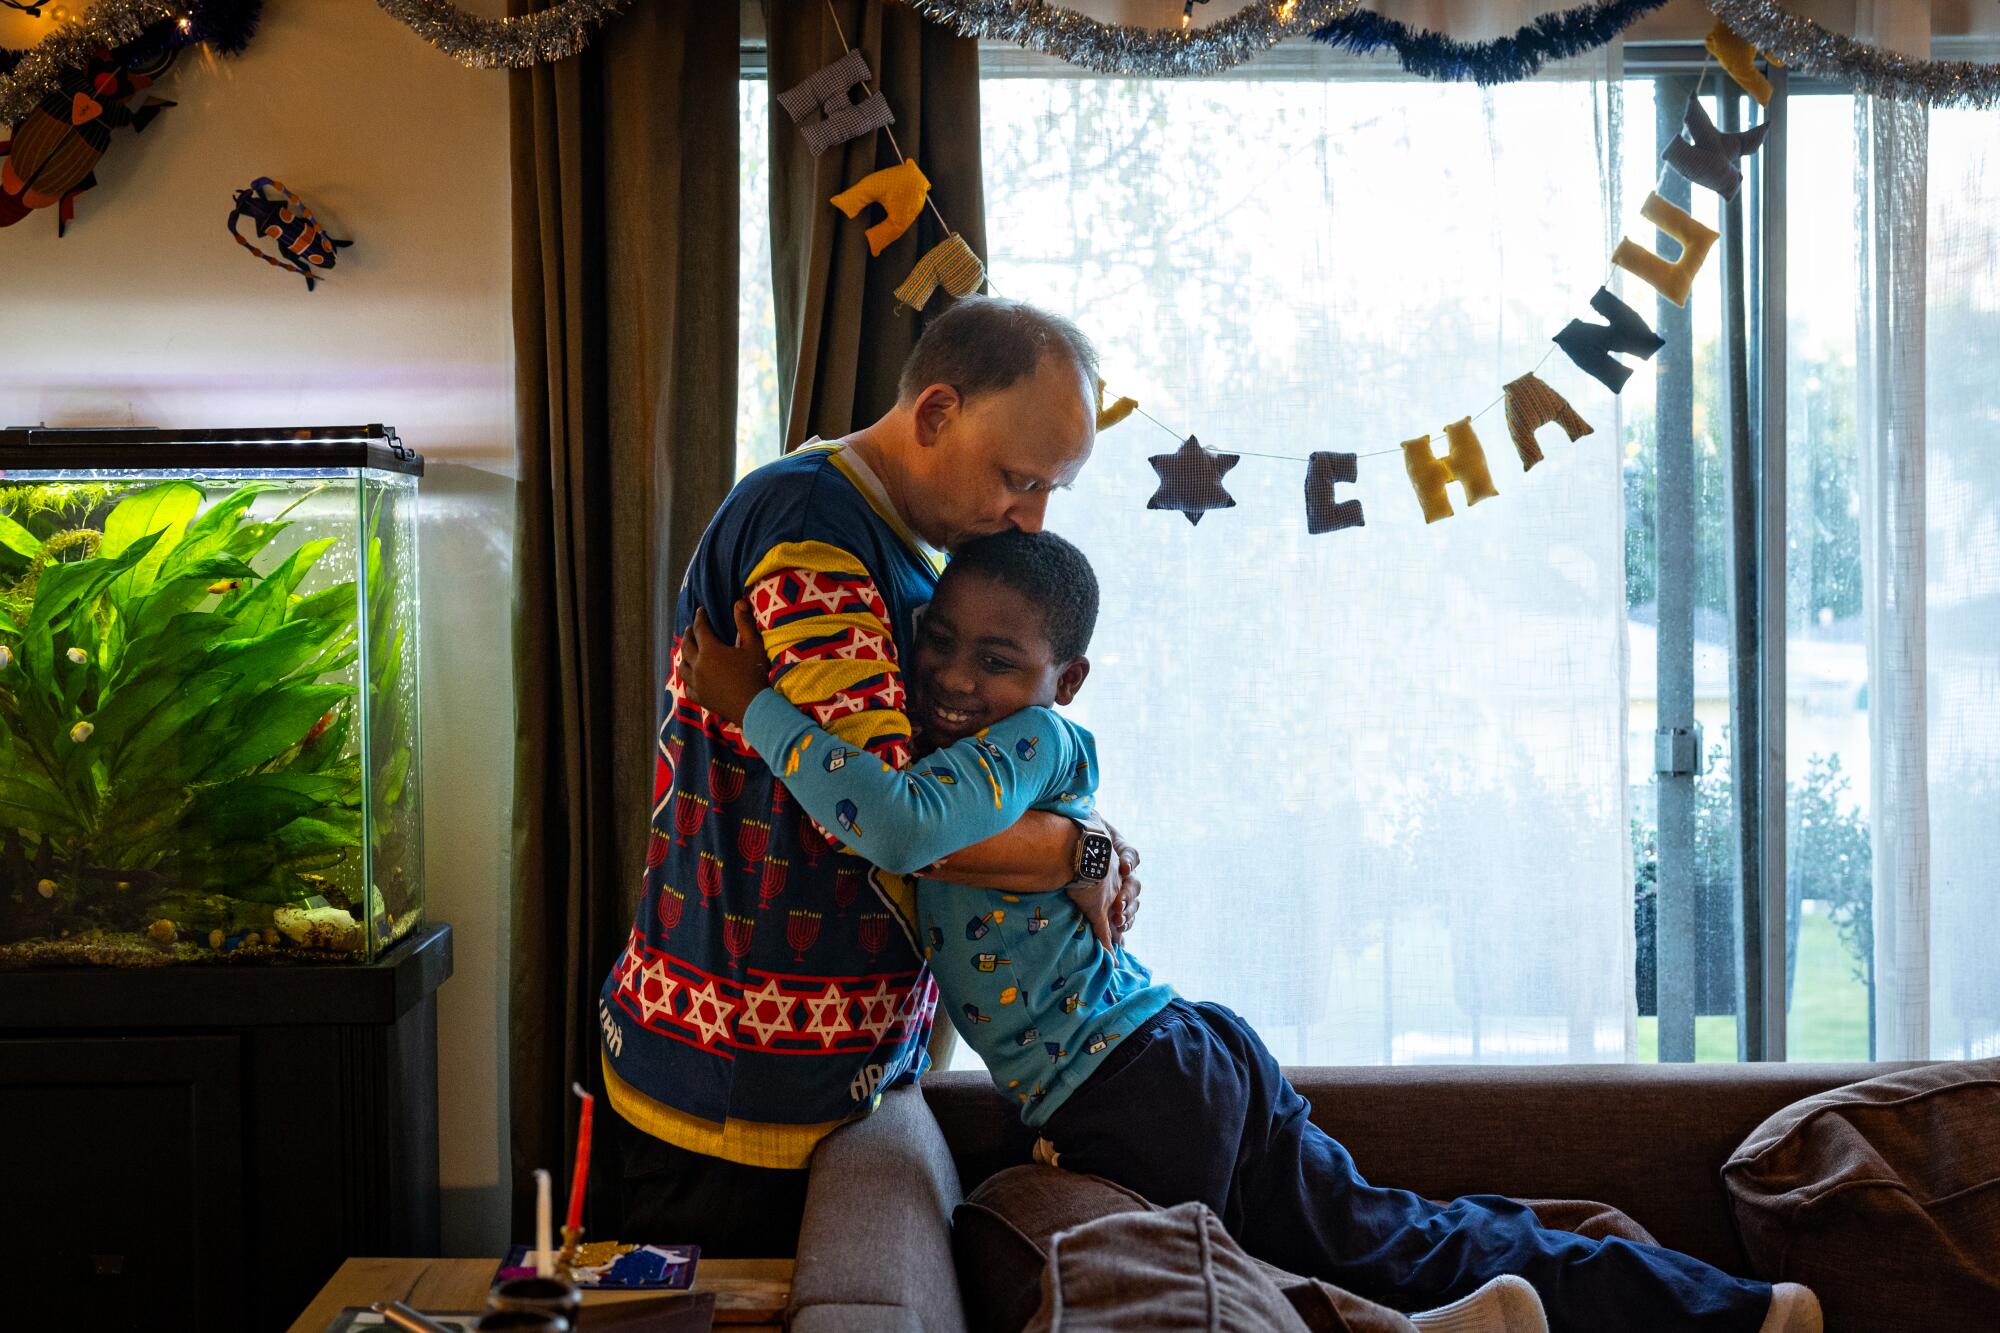 A man and boy embrace as a Happy Chanukah sign stretches across a window behind them.